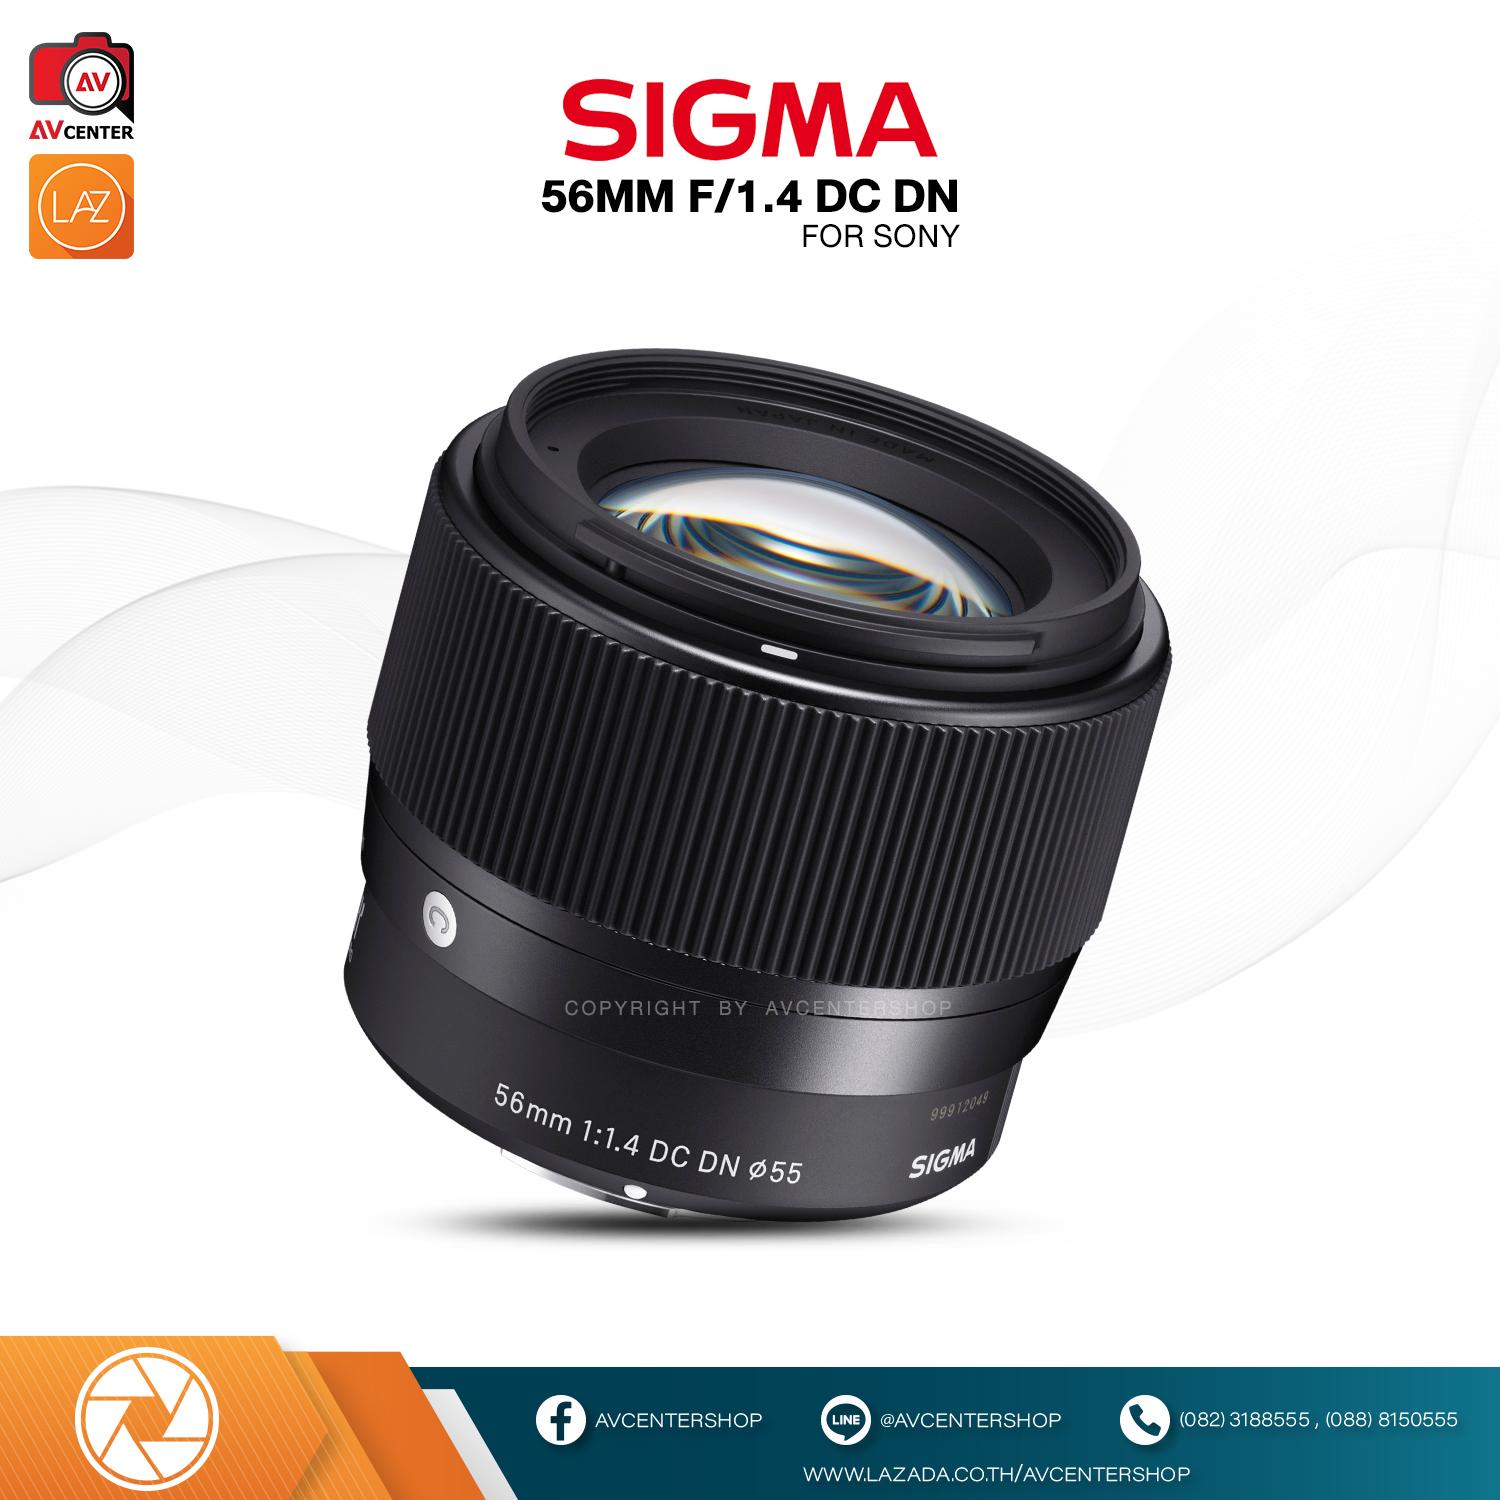 Sigma Lens 56 mm. F/1.4 DC DN (for SONY E) [ สินค้ารับประกัน AVcentershop 1 ปี ]